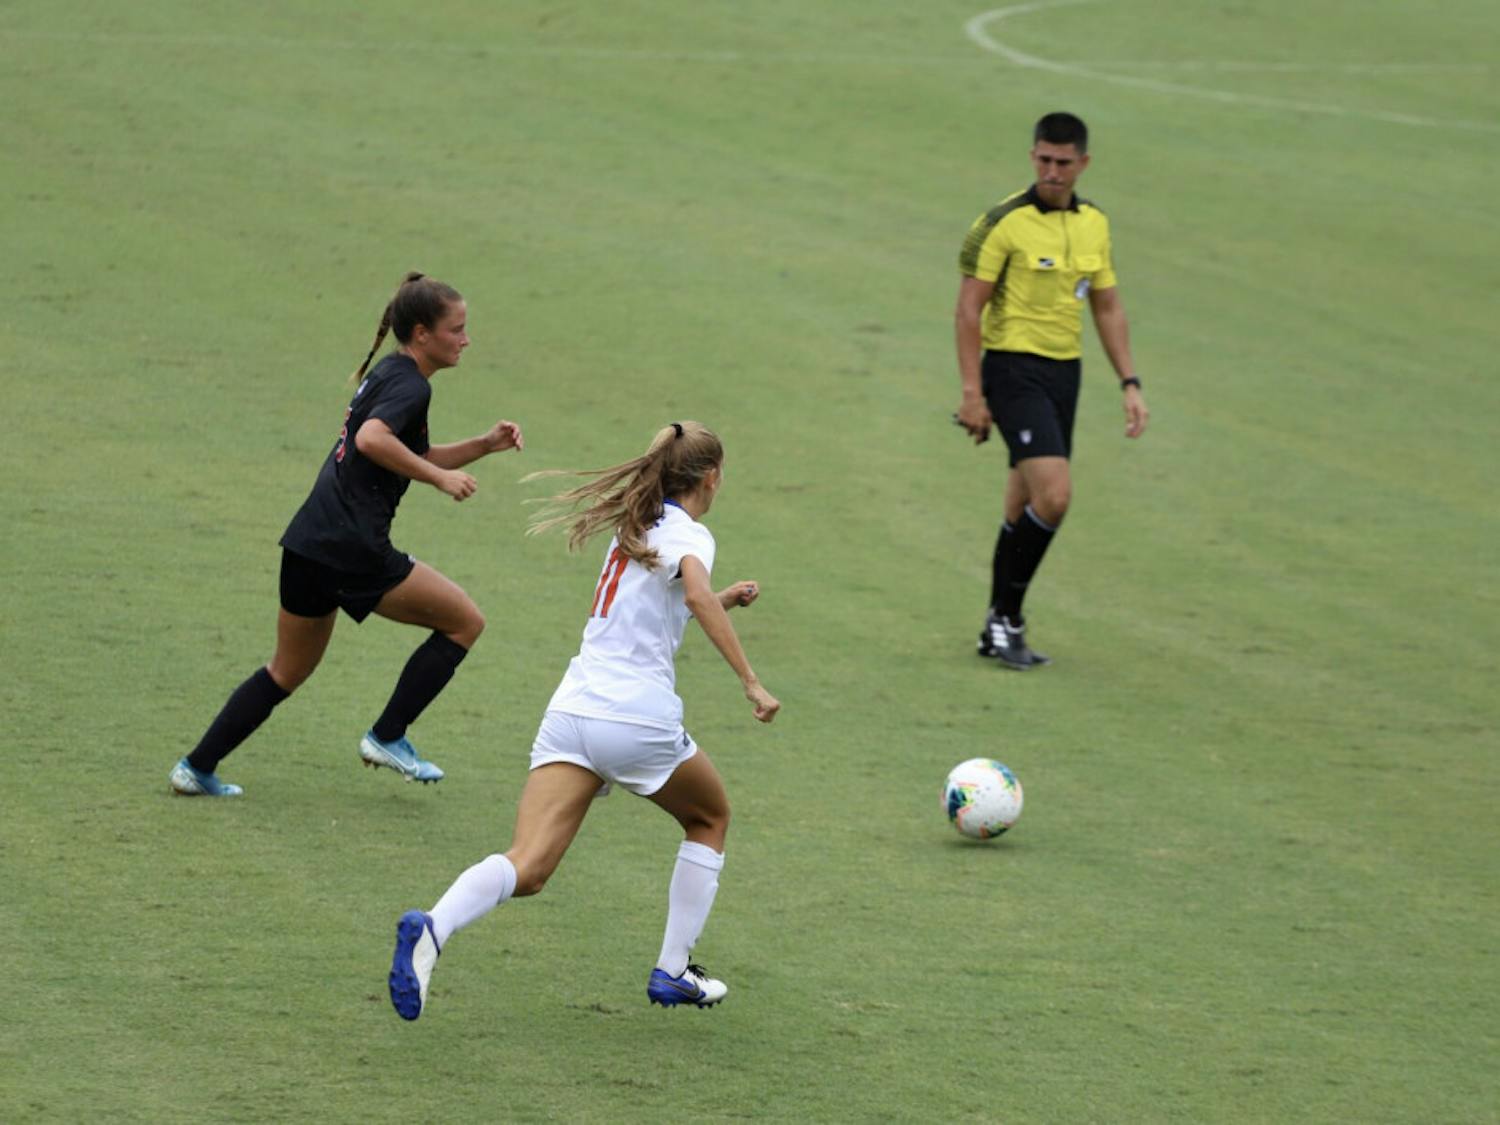 Redshirt freshman midfielder Nicole Vernis fights for a ball at Florida’s home opener against Georgia this season. Vernis scored her first collegiate goal versus South Carolina Sunday afternoon.